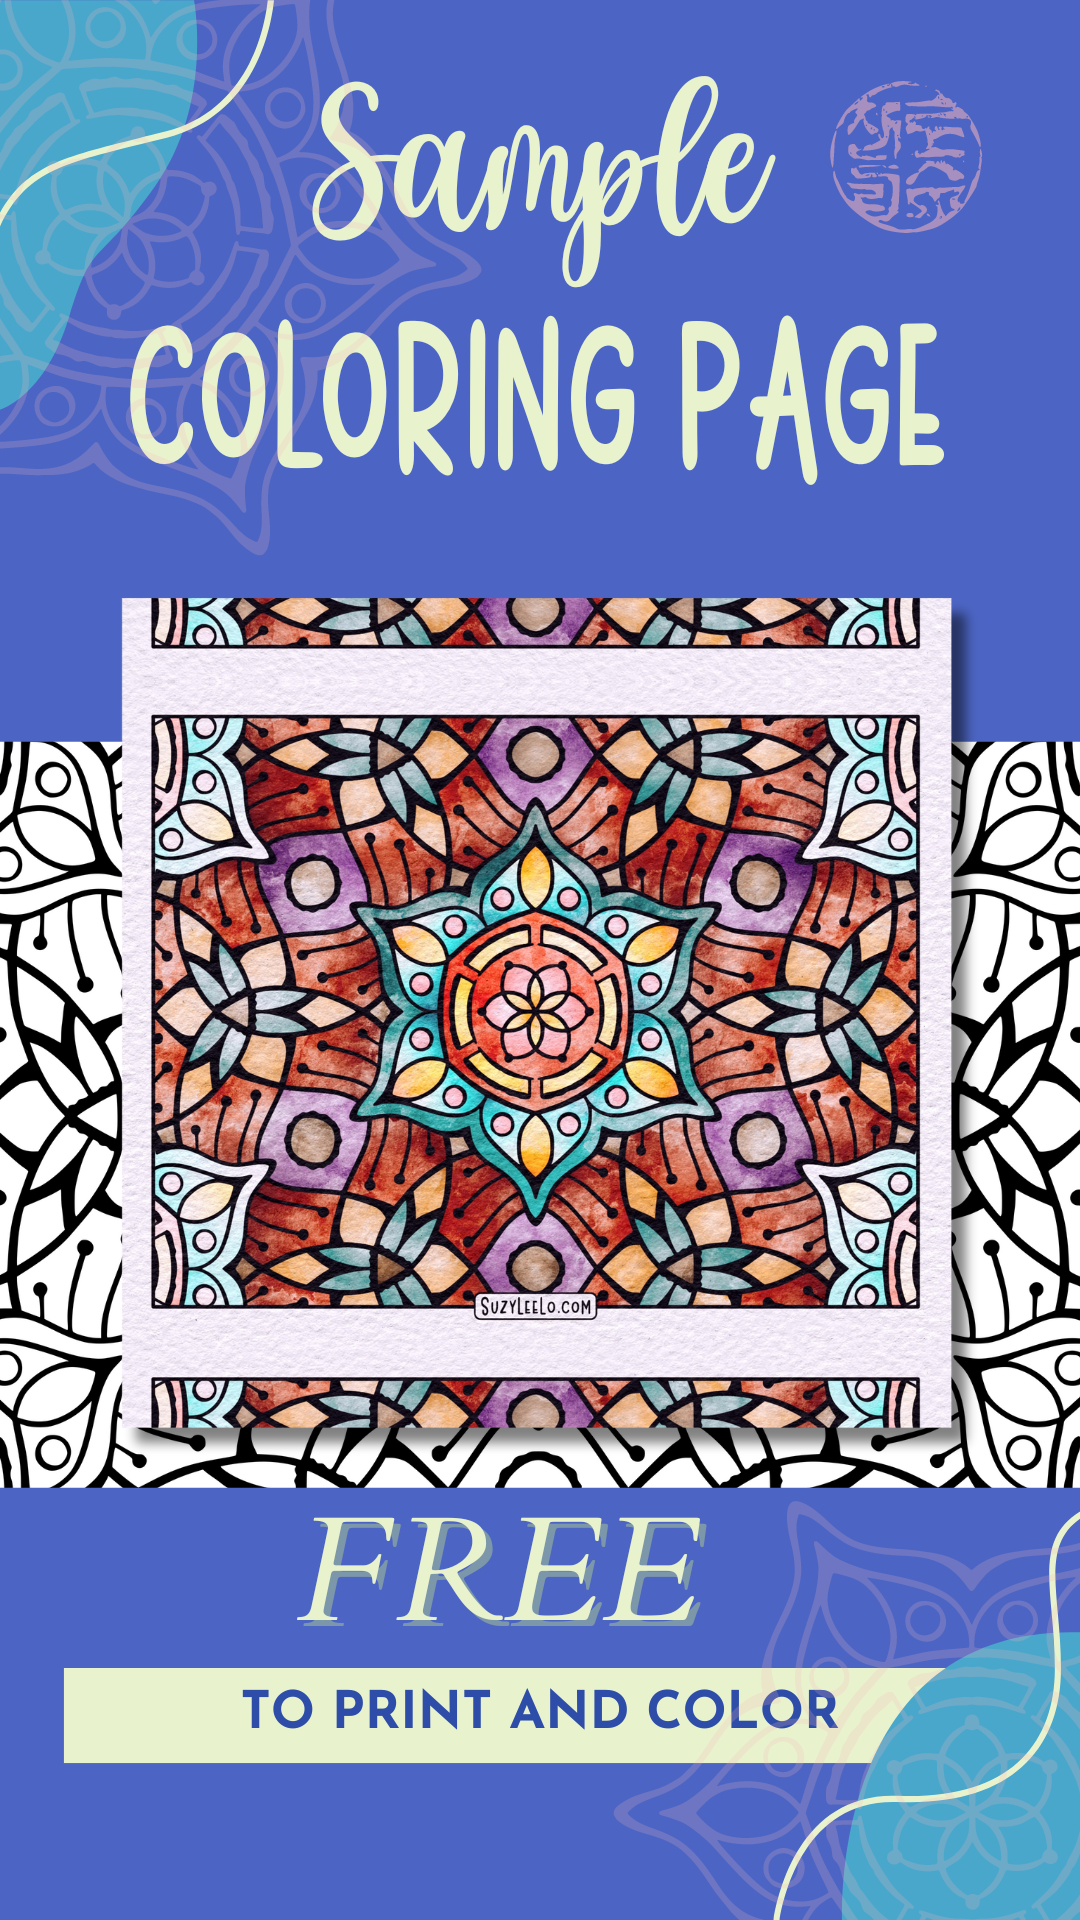 Sample Coloring Page. Free to print and color. Pattern coloring page by Suzy LeeLo